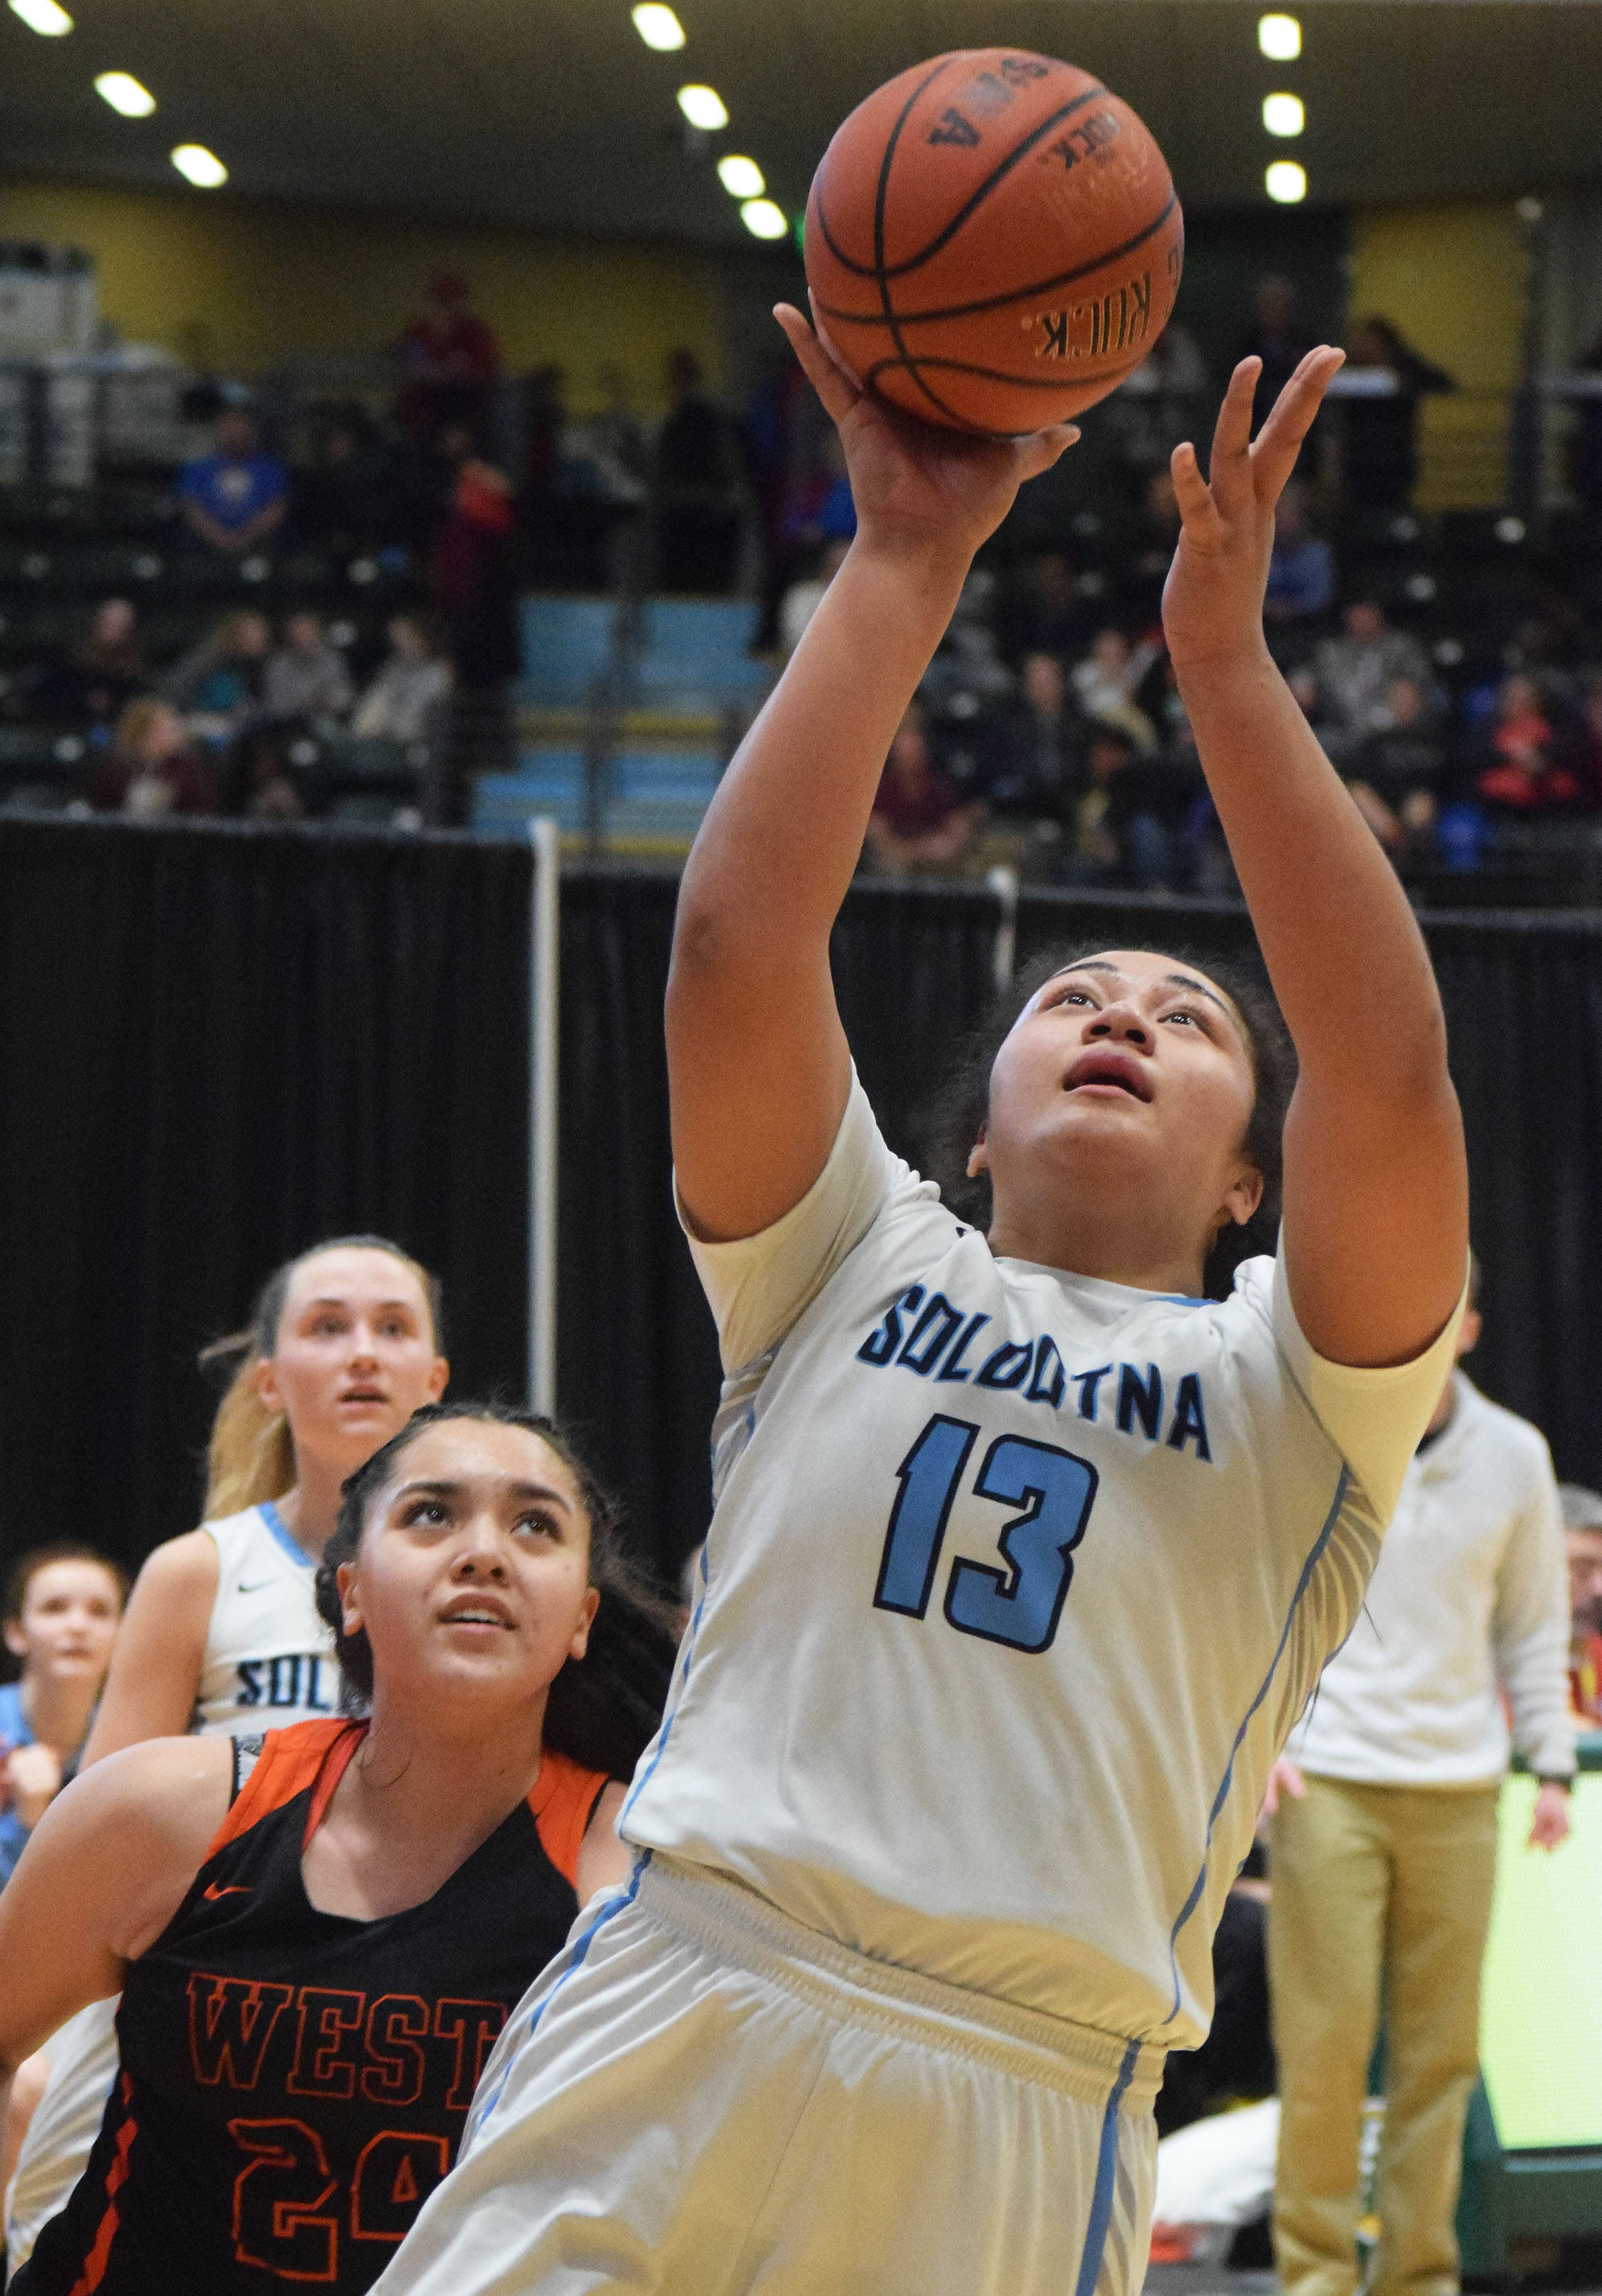 Soldotna’s Ituau Tuisaula (13) puts up a shot over West’s Juliette Adlawan, Thursday, Mar. 21, 2019, at the Class 4A state championship tournament at the Alaska Airlines Center in Anchorage. (Photo by Joey Klecka/Peninsula Clarion)